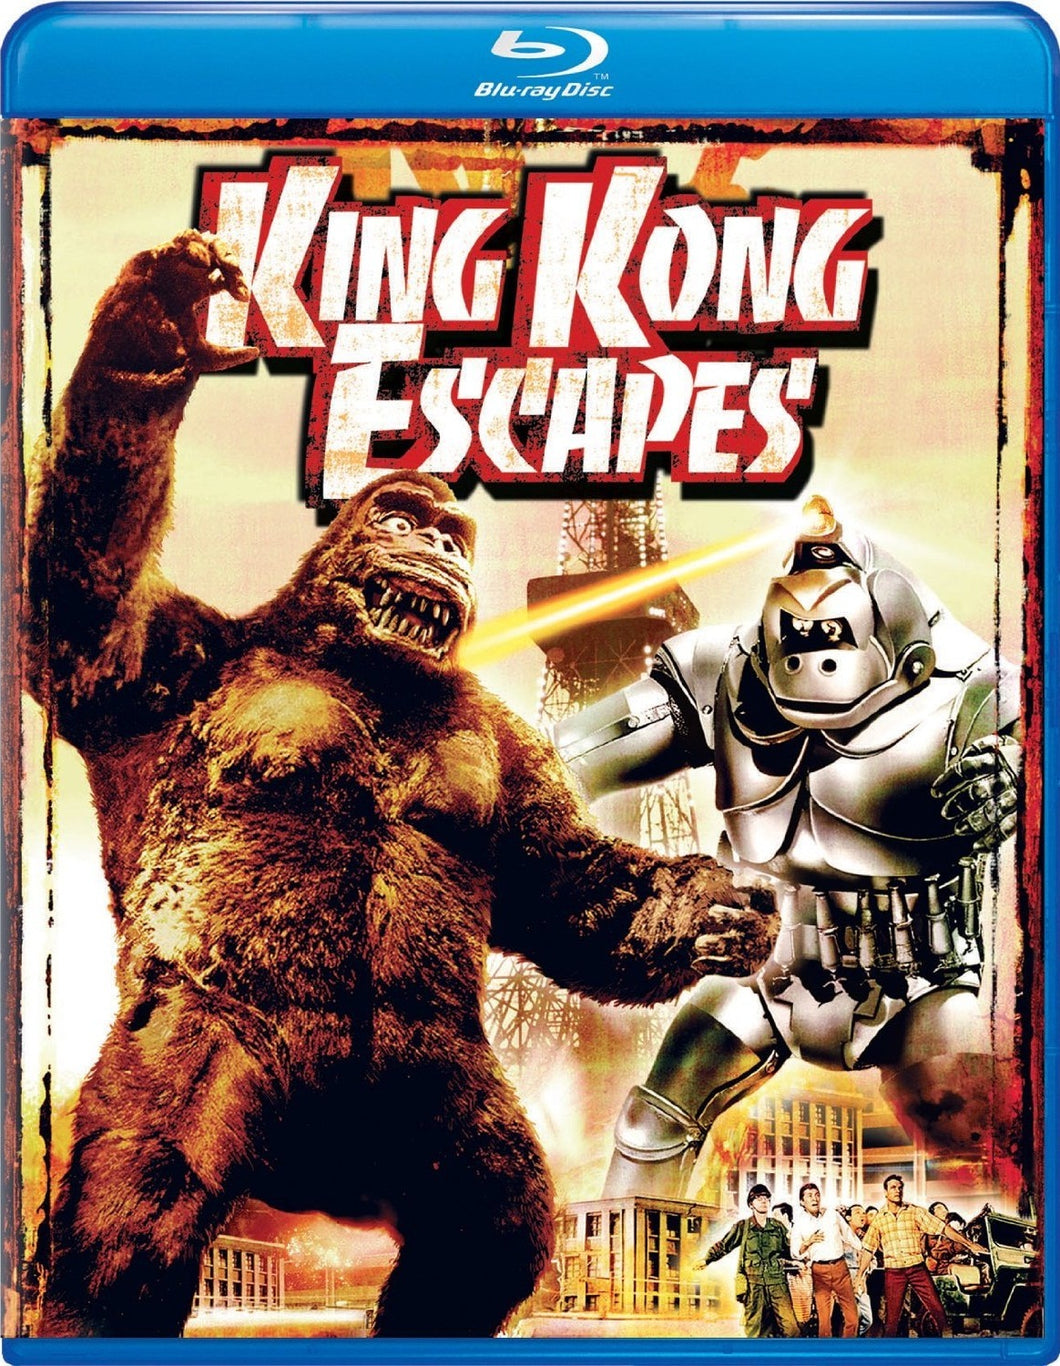 King Kong Escapes (STFR) (1967) - front cover